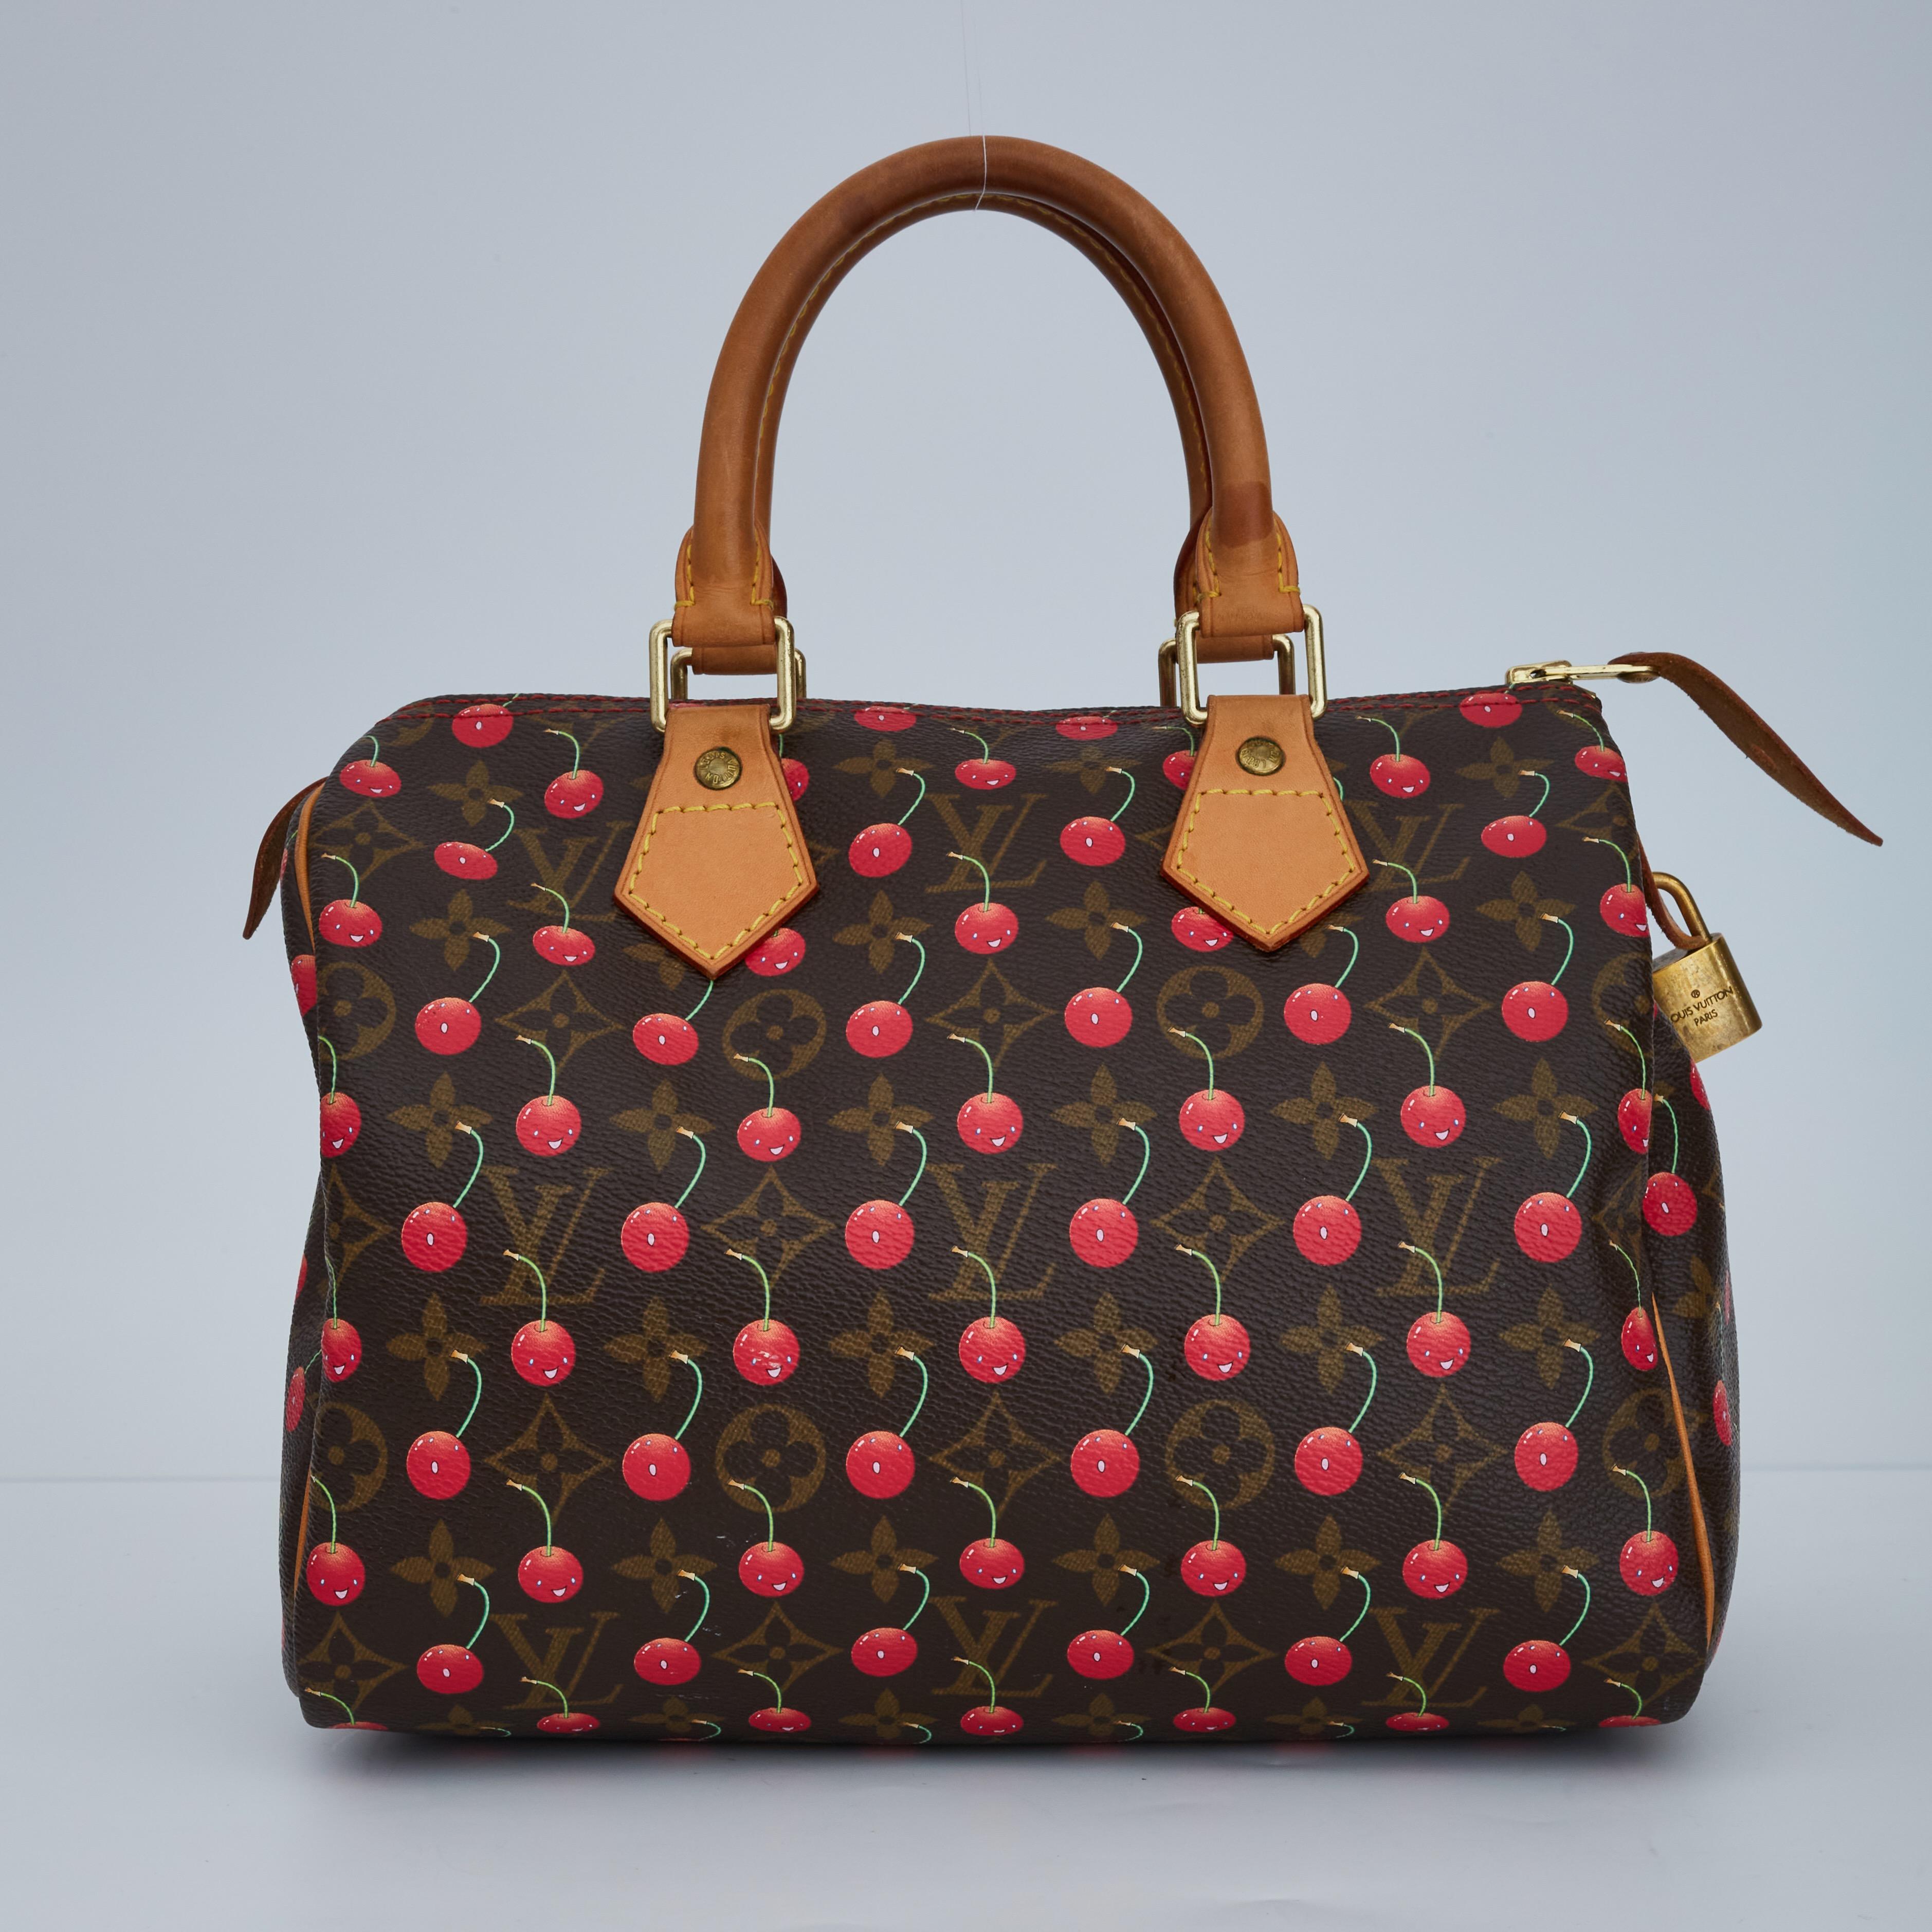 This handbag is made of traditional monogram coated canvas with an overlay of smiling cherries. The bag features rolled vachetta top handles, piping on the borders of the bag, gold hardware, top zip closure and a cocoa brown fabric interior with a